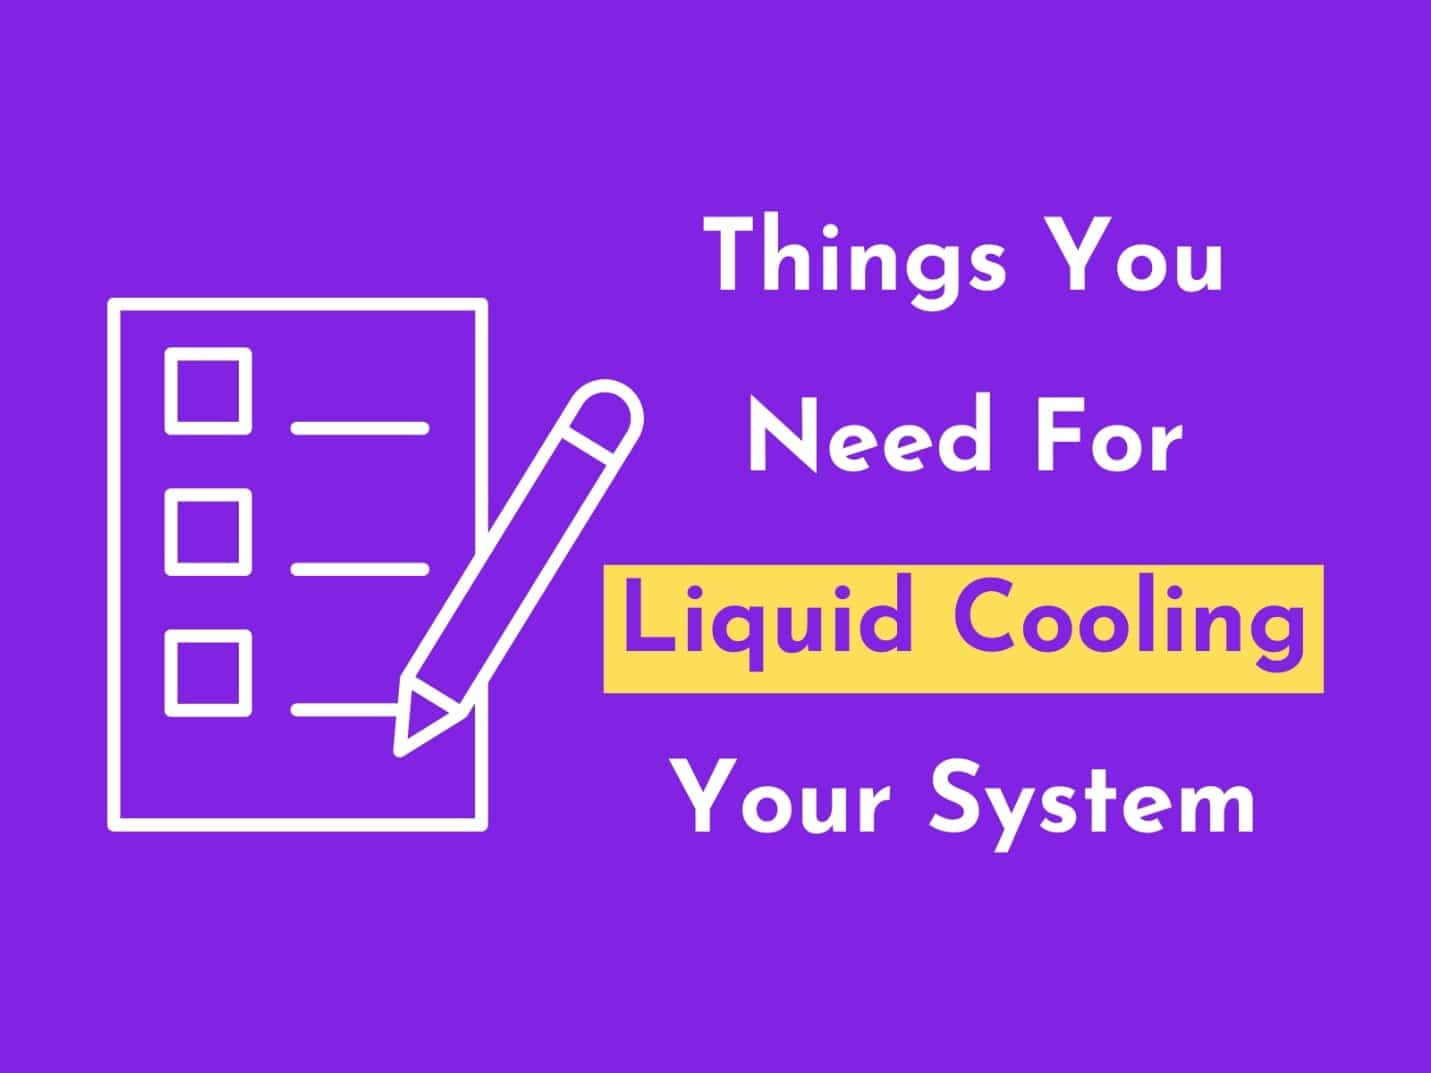 C:\Users\Mohsin\Downloads\What is thre process of Cooler\Things You Need For Liquid Cooling Your System.jpg